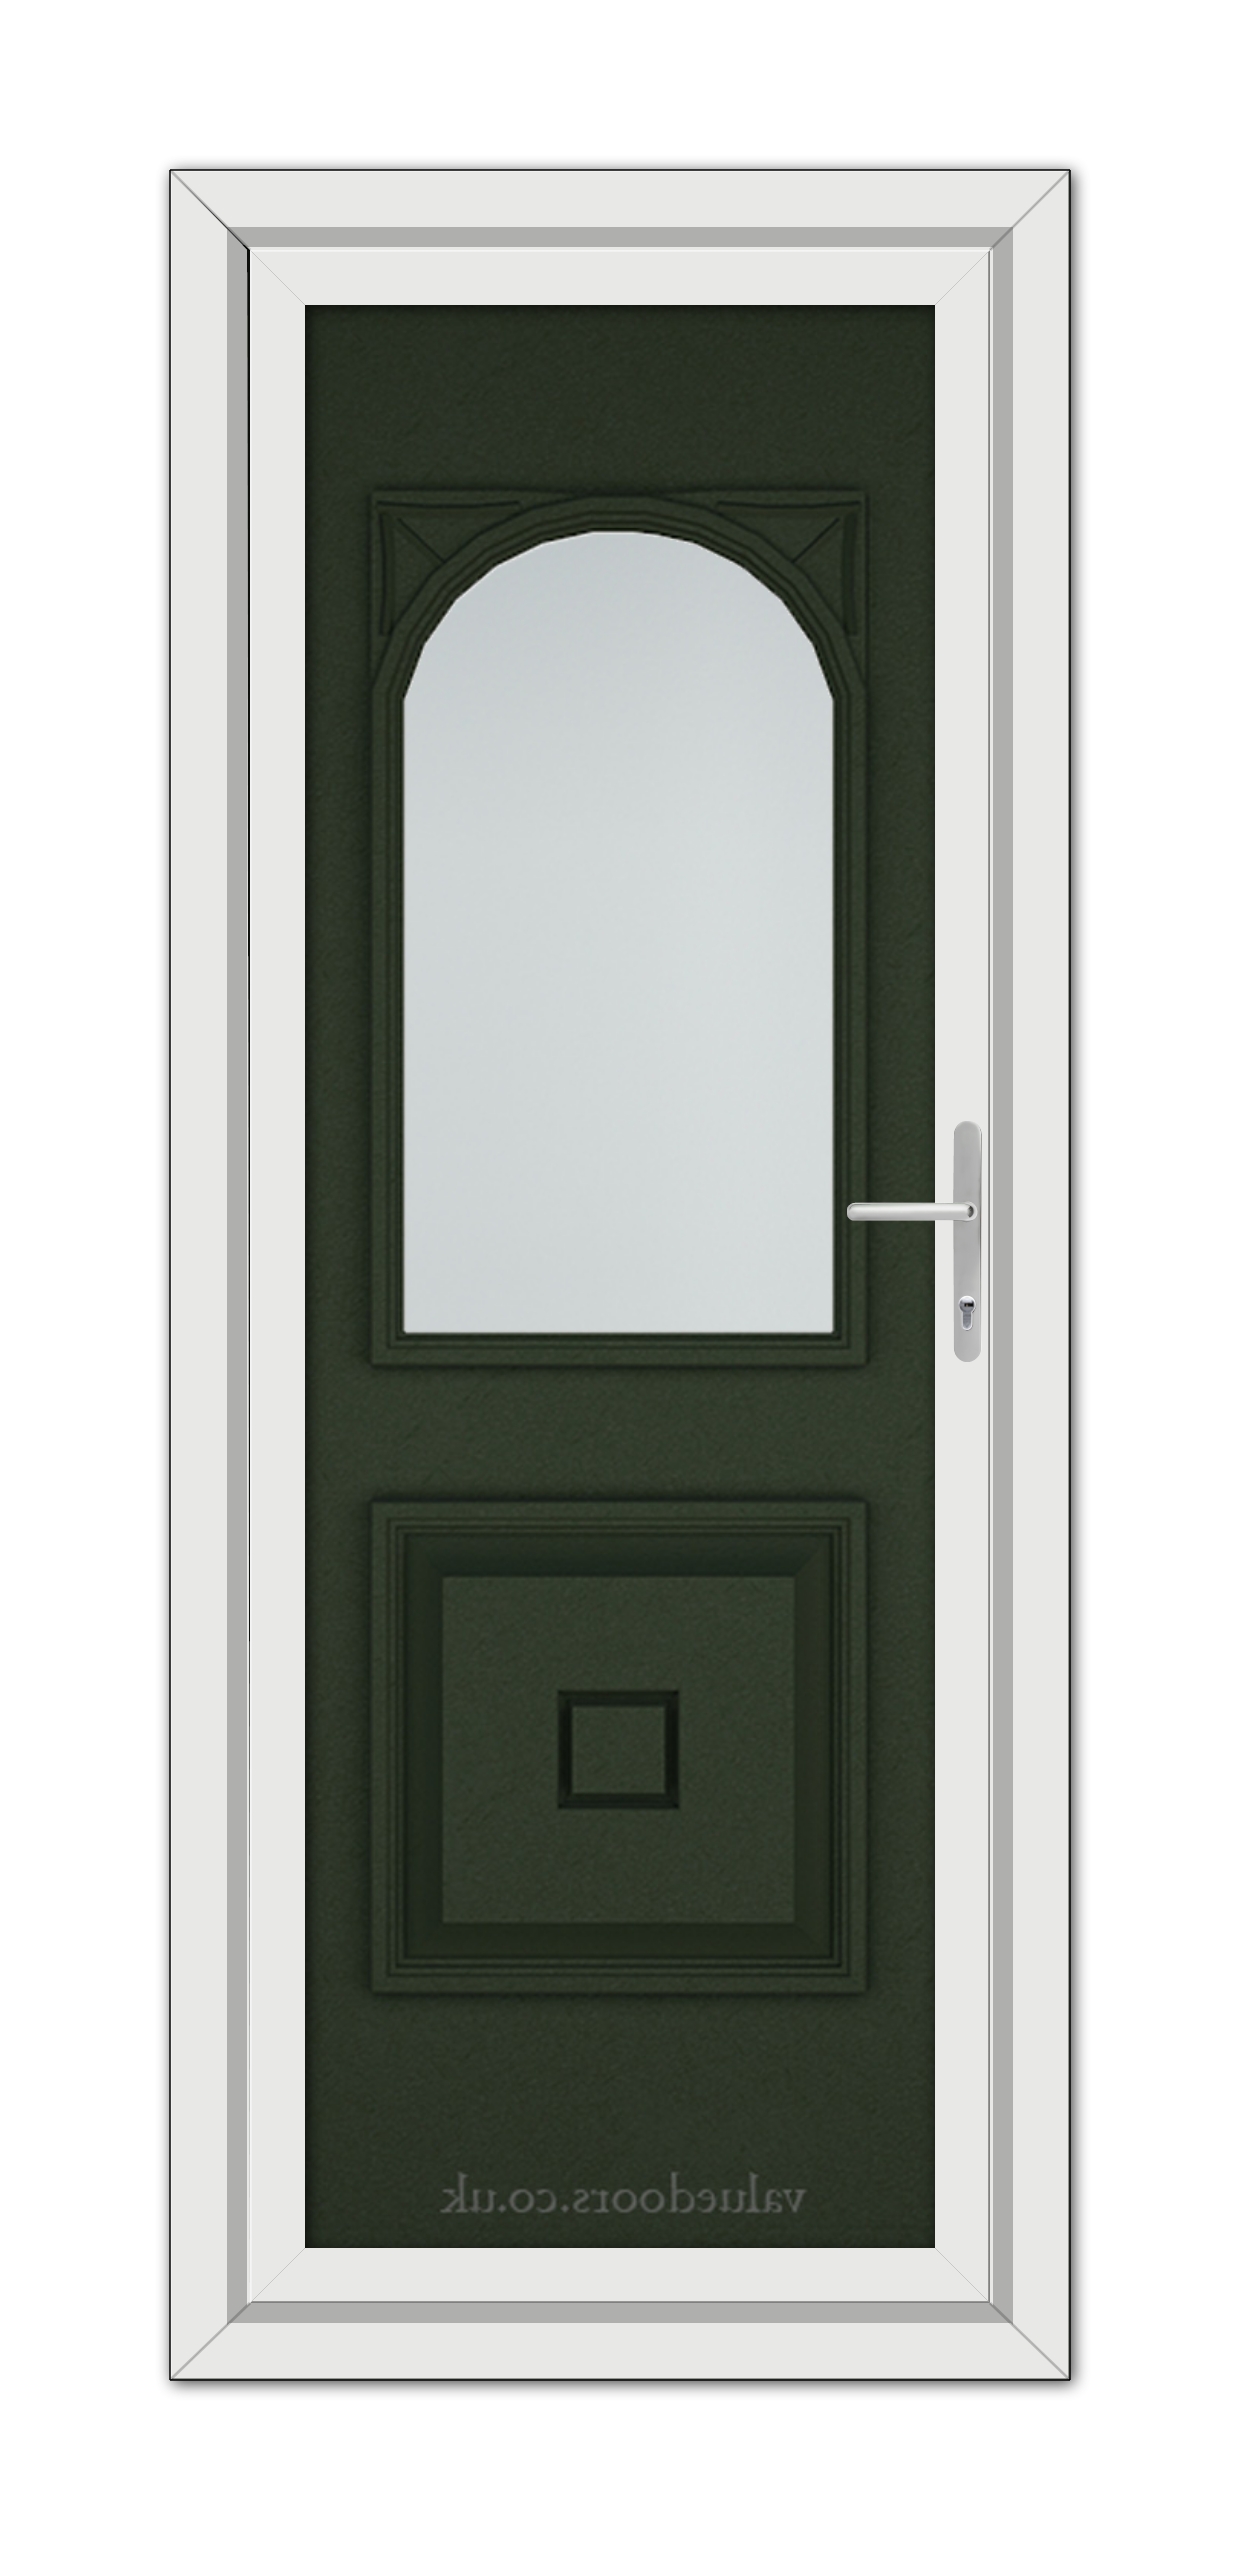 A Green Reims uPVC Door with a glass panel.